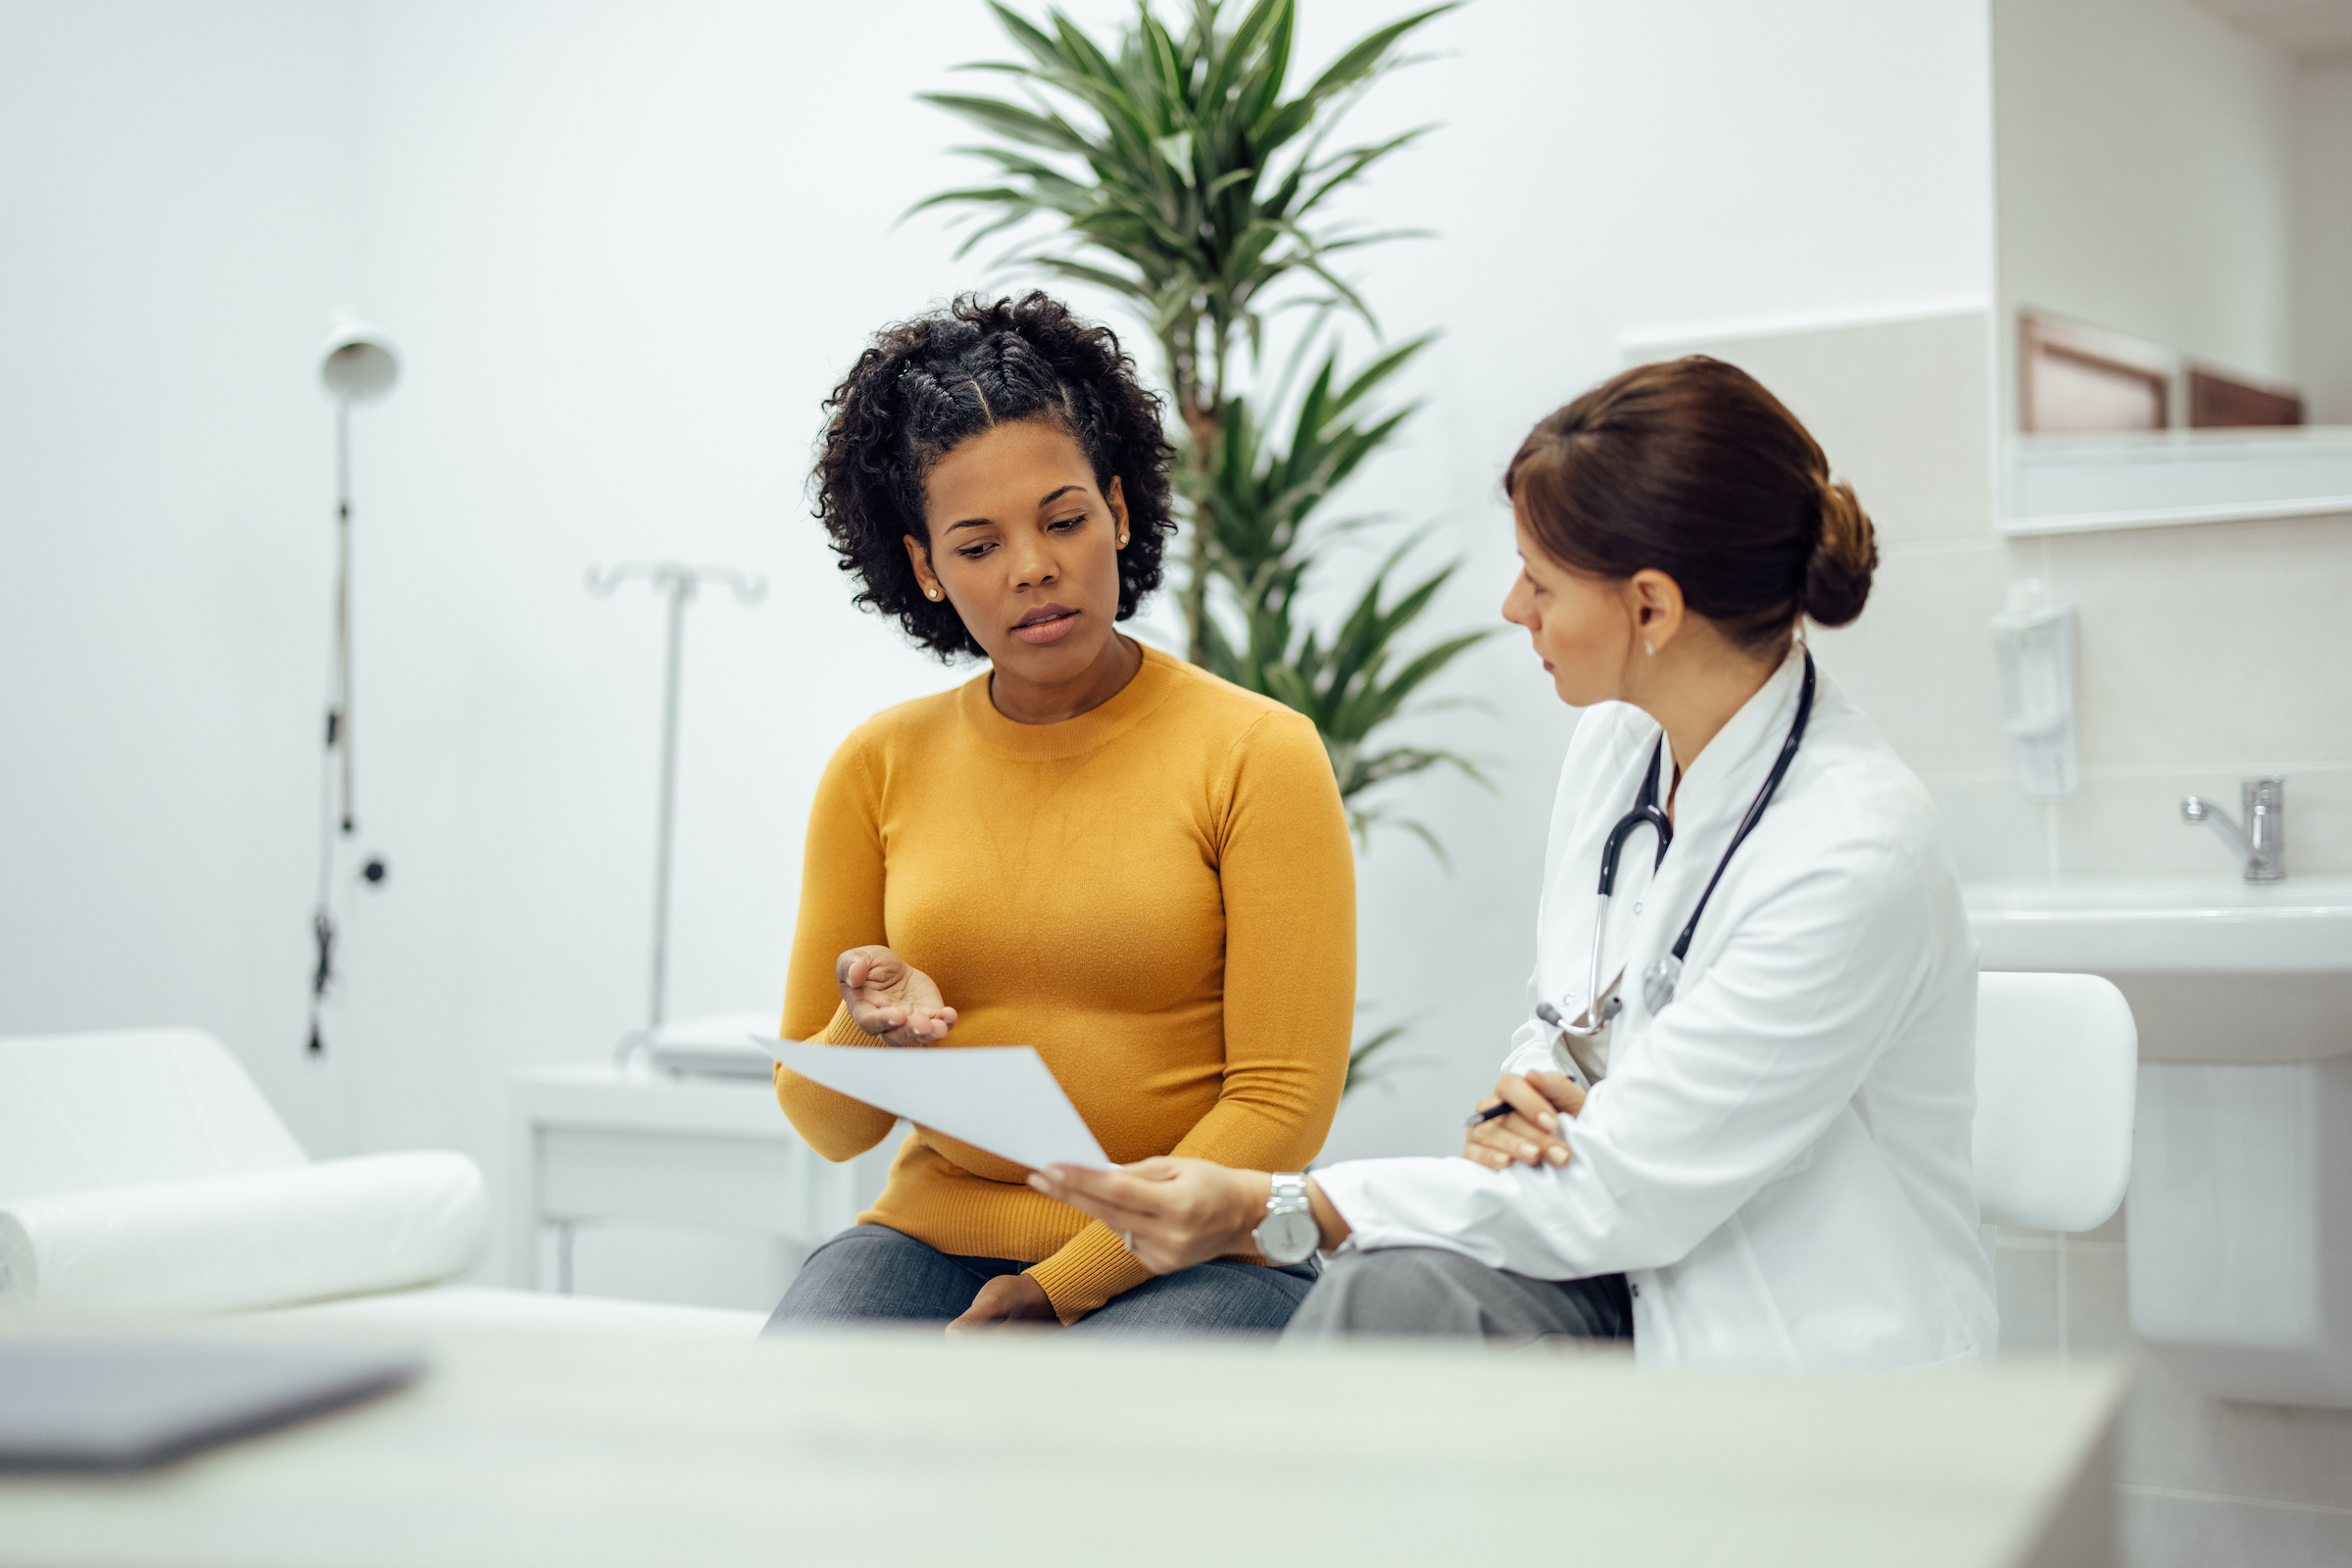 Why is it so hard to find an endometriosis specialist? 